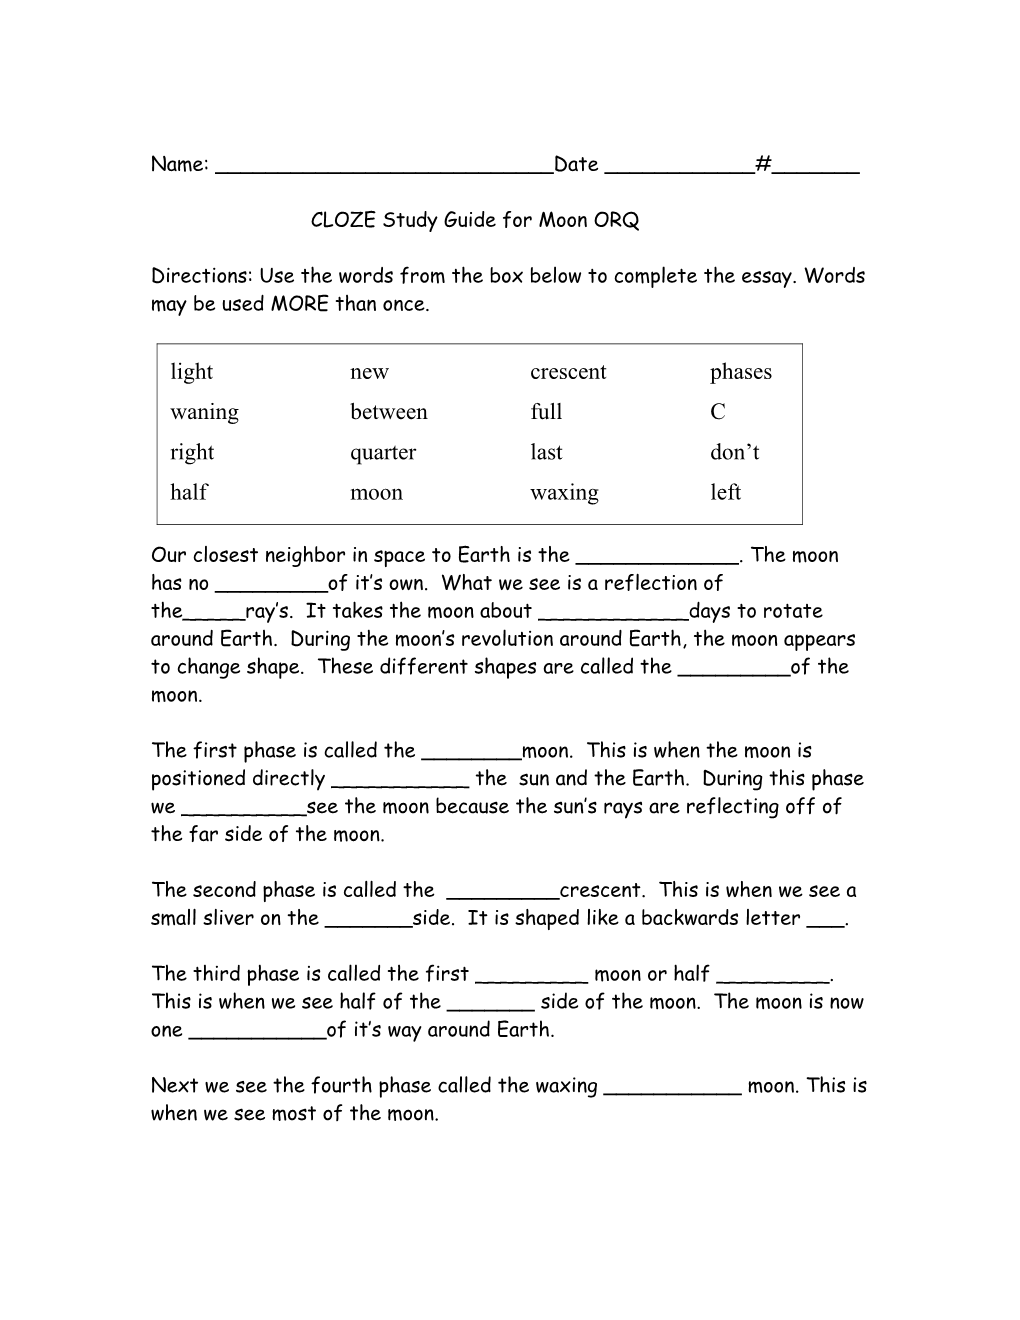 CLOZE Study Guide for Moon ORQ